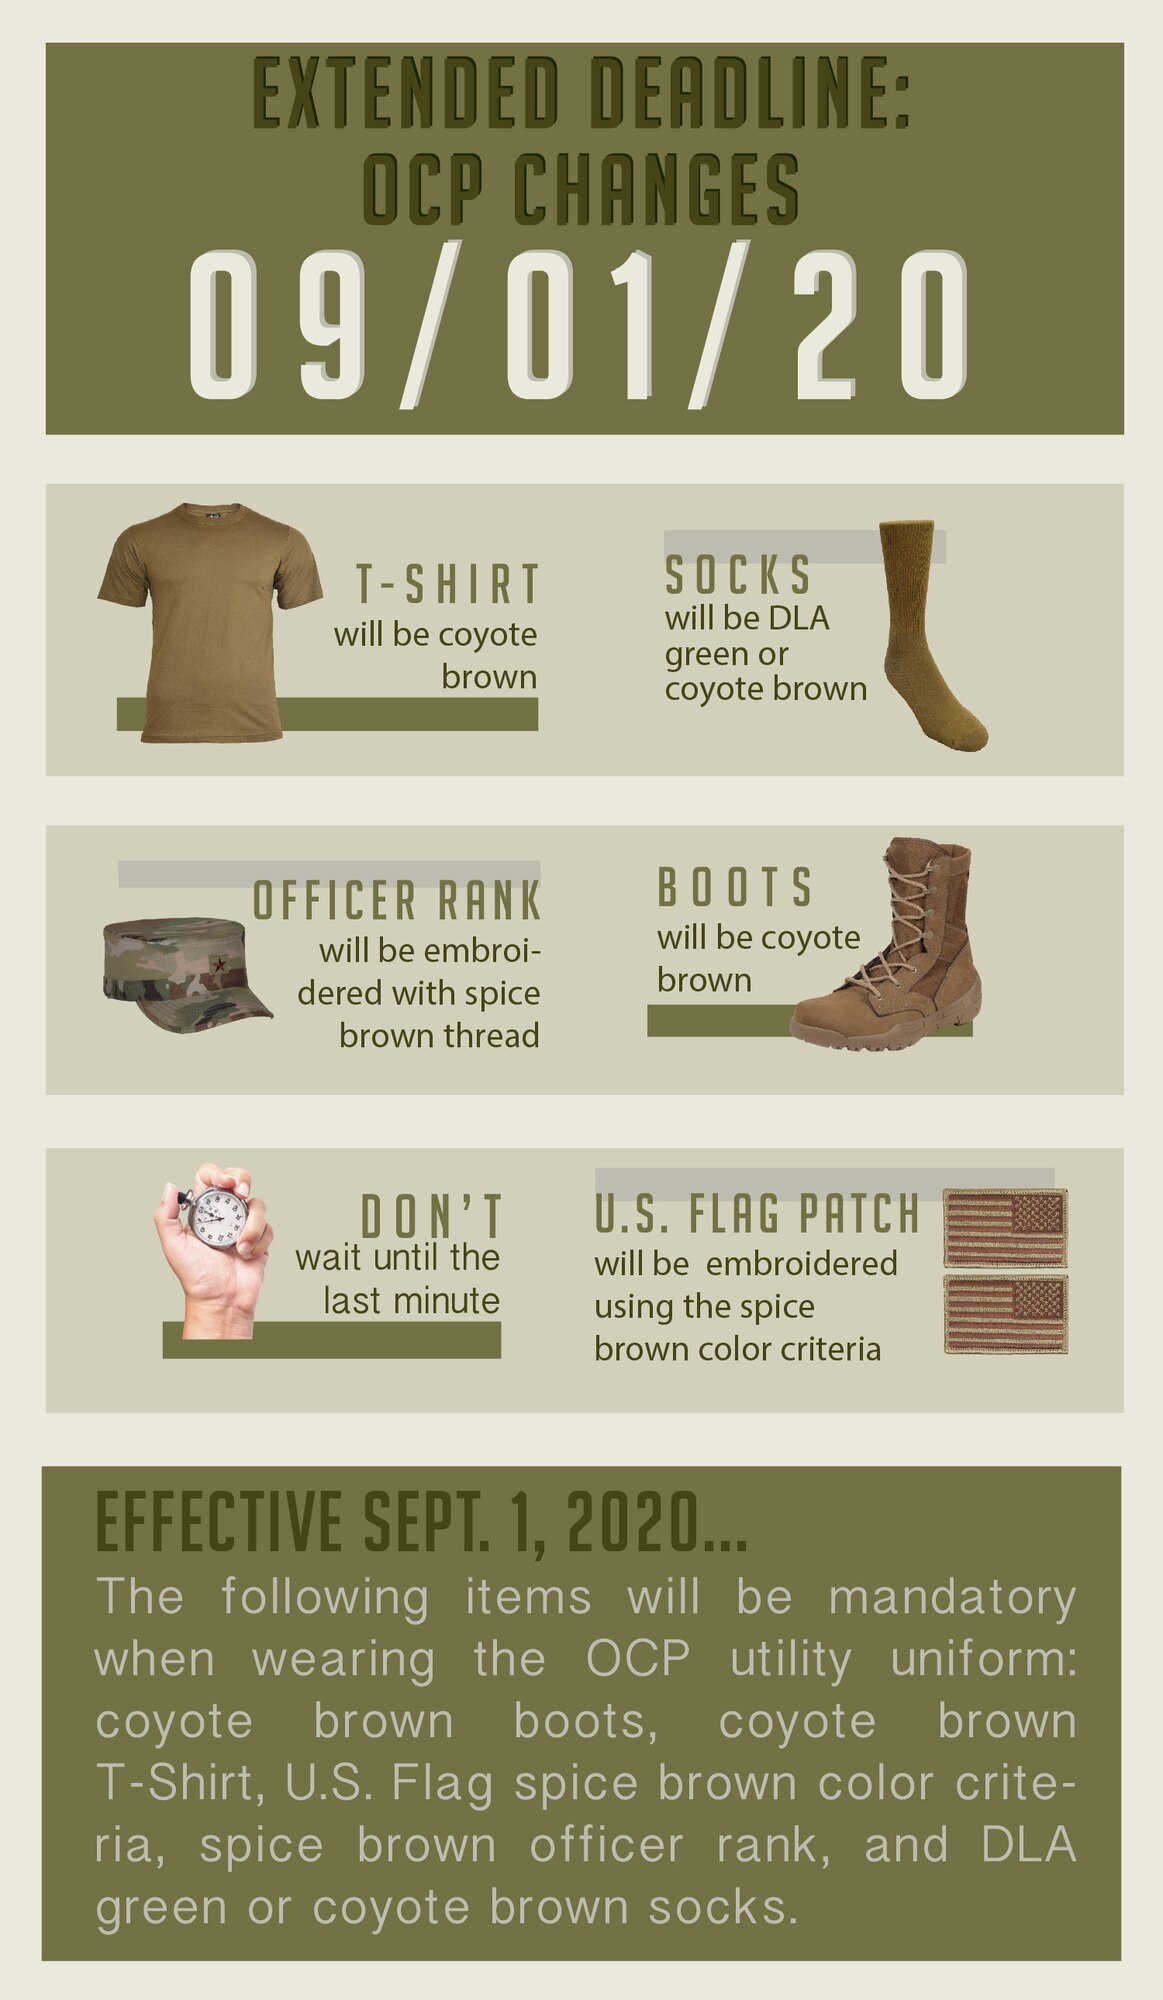 The deadline for the Operational Camouflage Pattern utility uniform is extended to Sept. 1, 2020. The following items will be required when wearing the OCP utility uniform: coyote brown boots, coyote brown T-shirt, U.S. Flag spice brown color criteria, spice brown officer rank, and green or coyote brown socks. Airmen are encouraged to begin purchasing these items if not already owned. (U.S. Air Force graphic by Airman Amanda Lovelace)